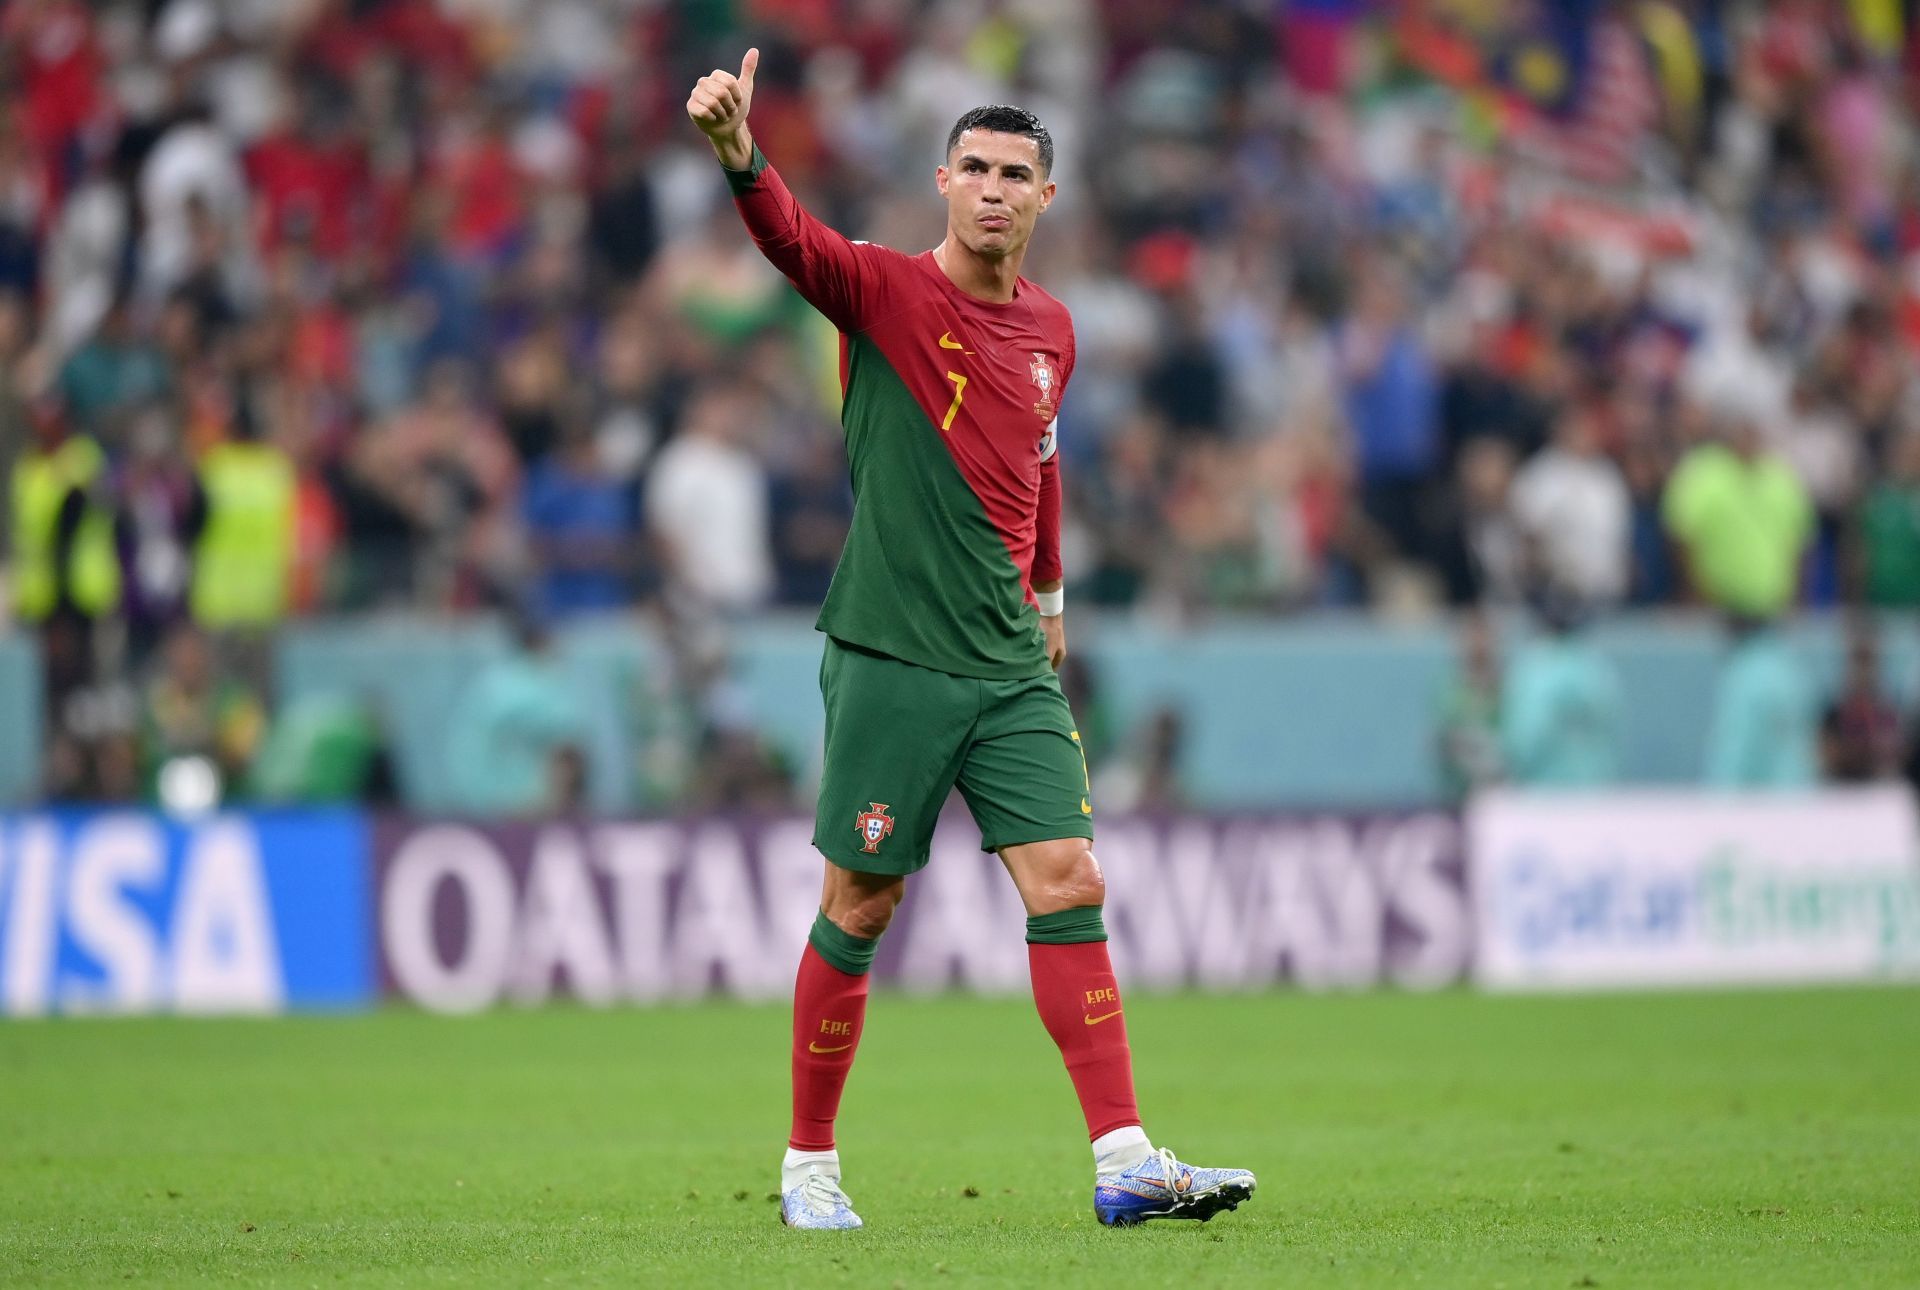 Ronaldo has cut a frustrating figure throughout the campaign